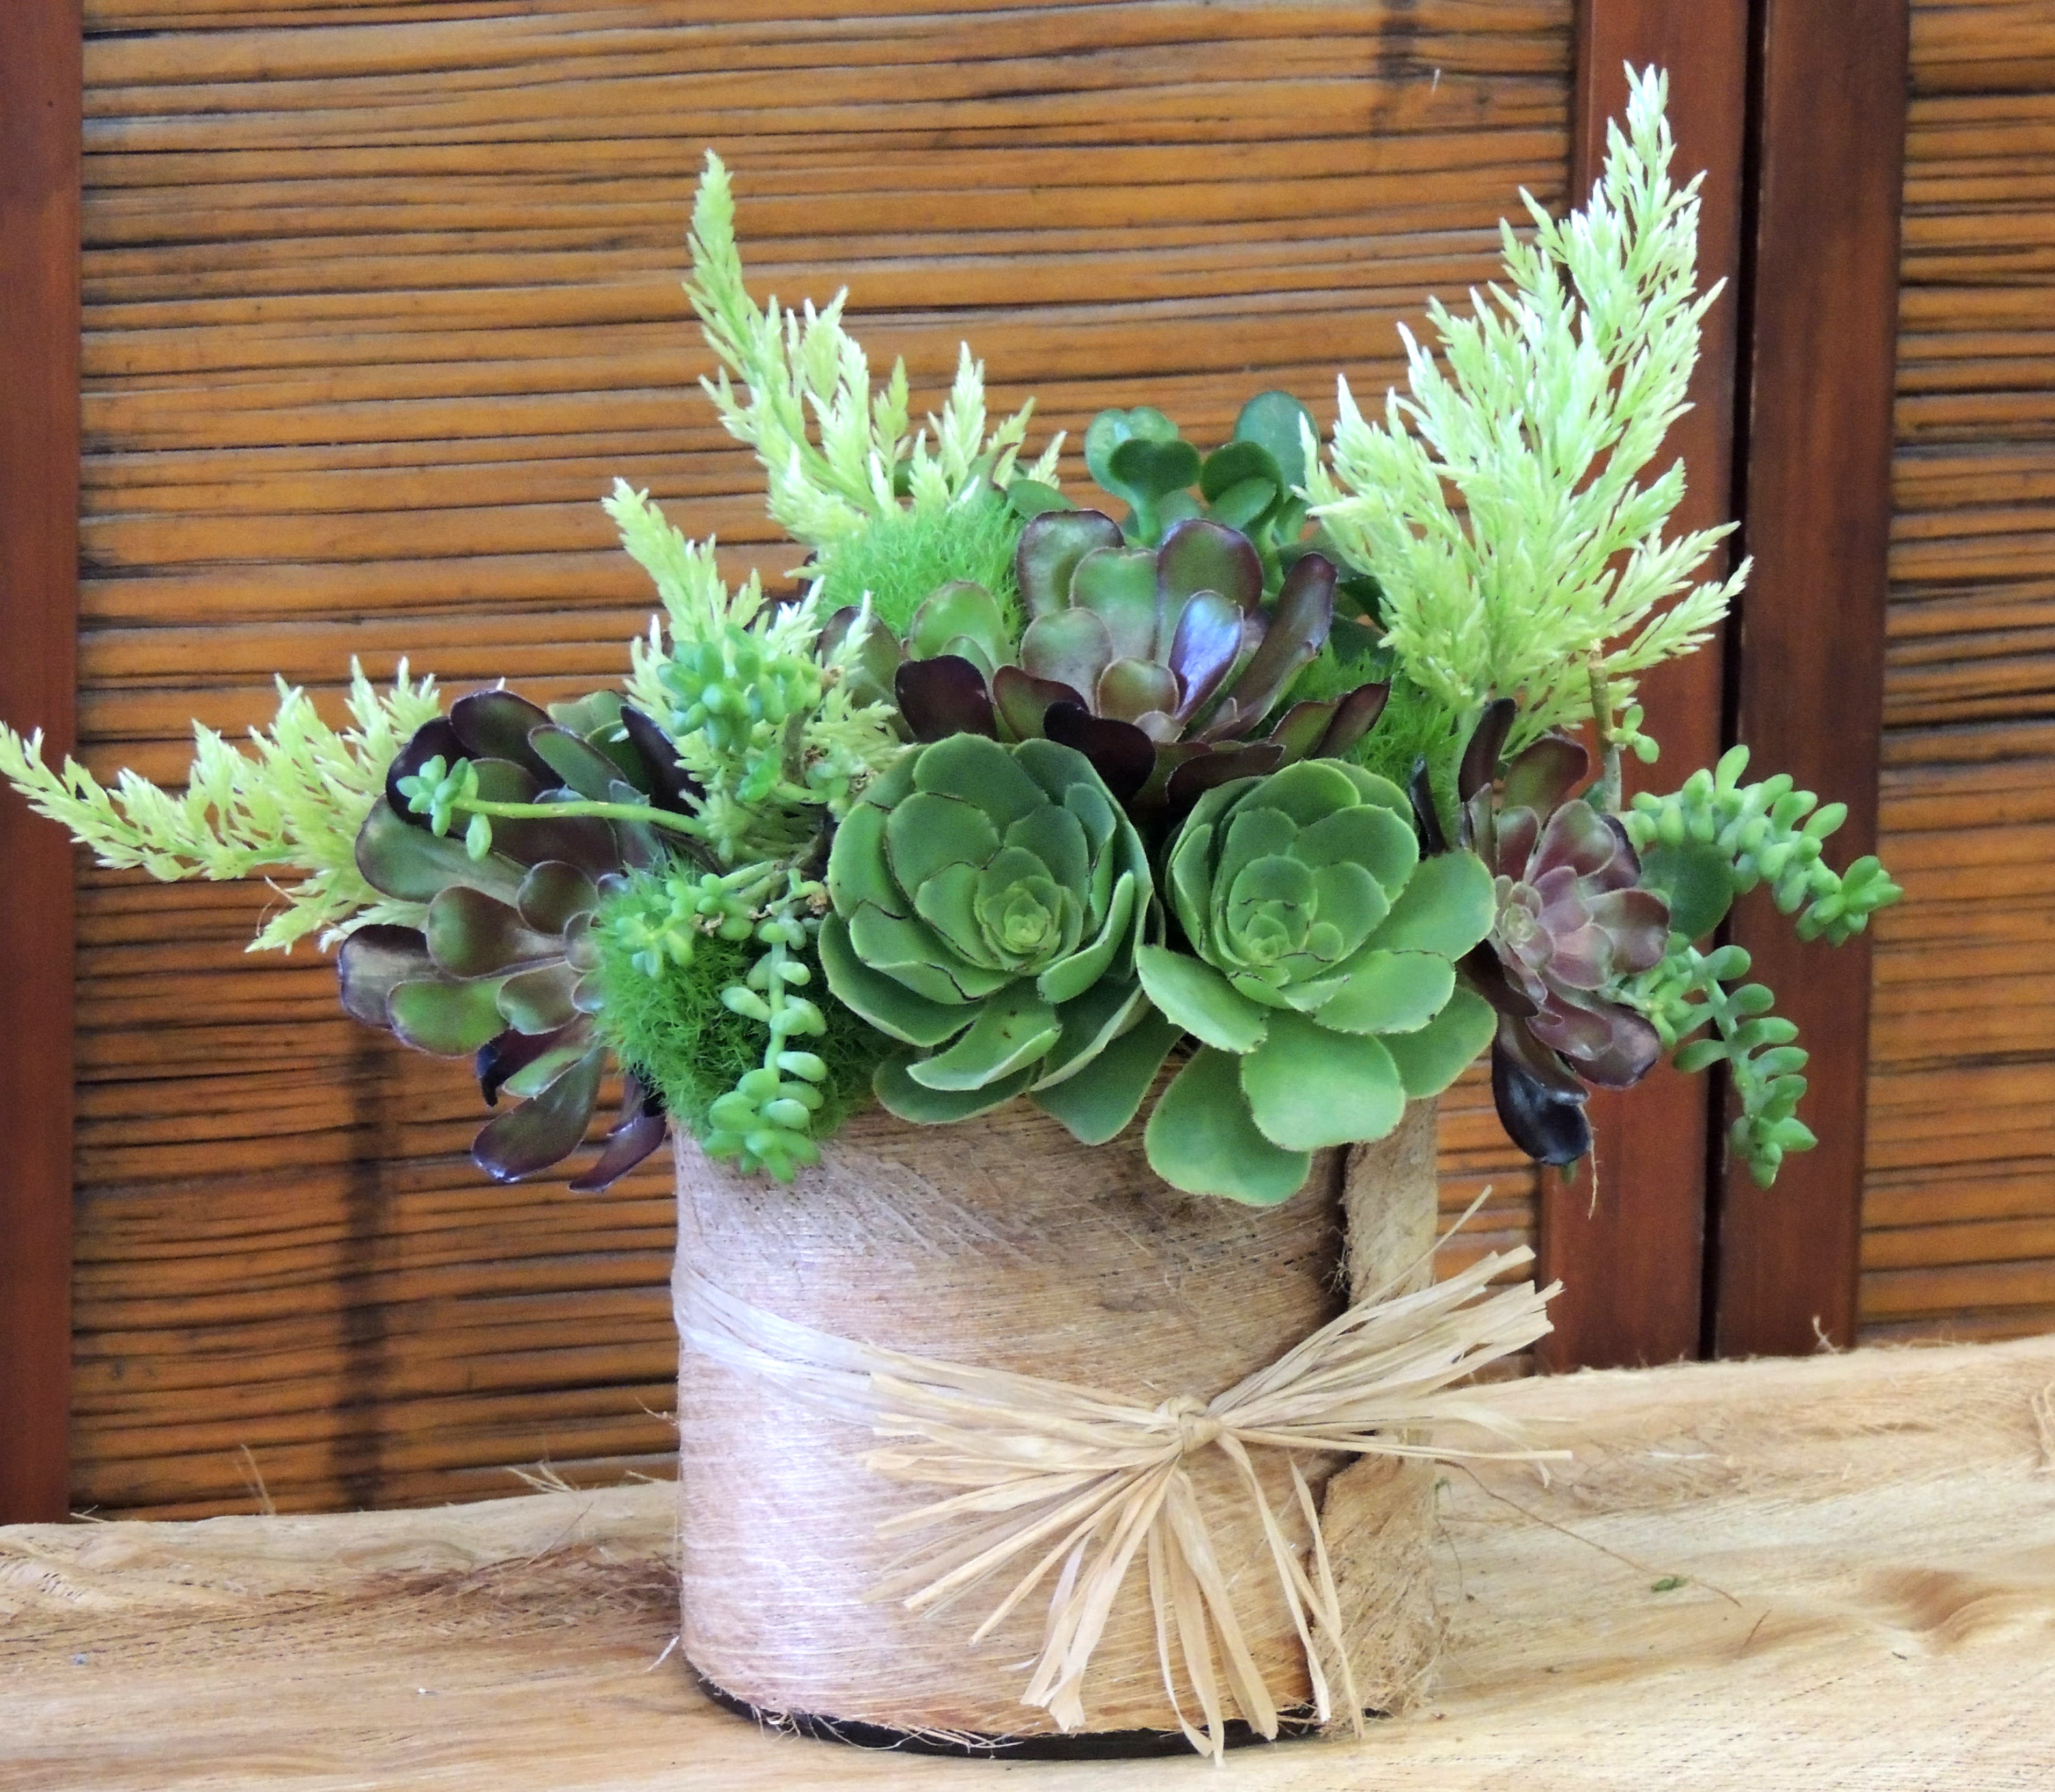 Succulents Green Lover  - Succulents, succulents, and more succulents! We combine this lovely arrangement with dianthus and other greenery in a palm lined container. The container is glass and covered with a natural linen-like fabric that gives a beautiful rustic feeling. It makes the perfect gift and is appropriate for any occasion!  Discover a captivating succulent paradise with our enchanting arrangement featuring a variety of succulents, dianthus, and lush greenery, elegantly nestled in a palm-lined glass container. At Dave's Flowers, we specialize in crafting unique floral compositions in Los Angeles, seamlessly blending the natural allure of succulents with the freshness of dianthus and verdant foliage.  Our carefully curated succulent collection boasts a diverse array of shapes and textures, creating a dynamic and visually striking arrangement that brings the beauty of the outdoors to any interior space. Complemented by the vibrant dianthus and carefully selected greenery, this arrangement radiates a refreshing and contemporary charm, perfect for gifting on any occasion.  Enhancing the presentation, the glass container is adorned with a natural linen-like fabric, lending a rustic touch that exudes both elegance and warmth. Whether it's a gesture of appreciation, a celebration, or a simple token of affection, this succulent ensemble from Dave's Flowers is sure to leave a lasting impression and bring a touch of natural sophistication to any setting.  Explore our diverse range of succulent creations at Dave's Flowers. in Los Angeles, and let us redefine your floral experience with our exquisite designs and unparalleled dedication to quality and craftsmanship.  DF-4006